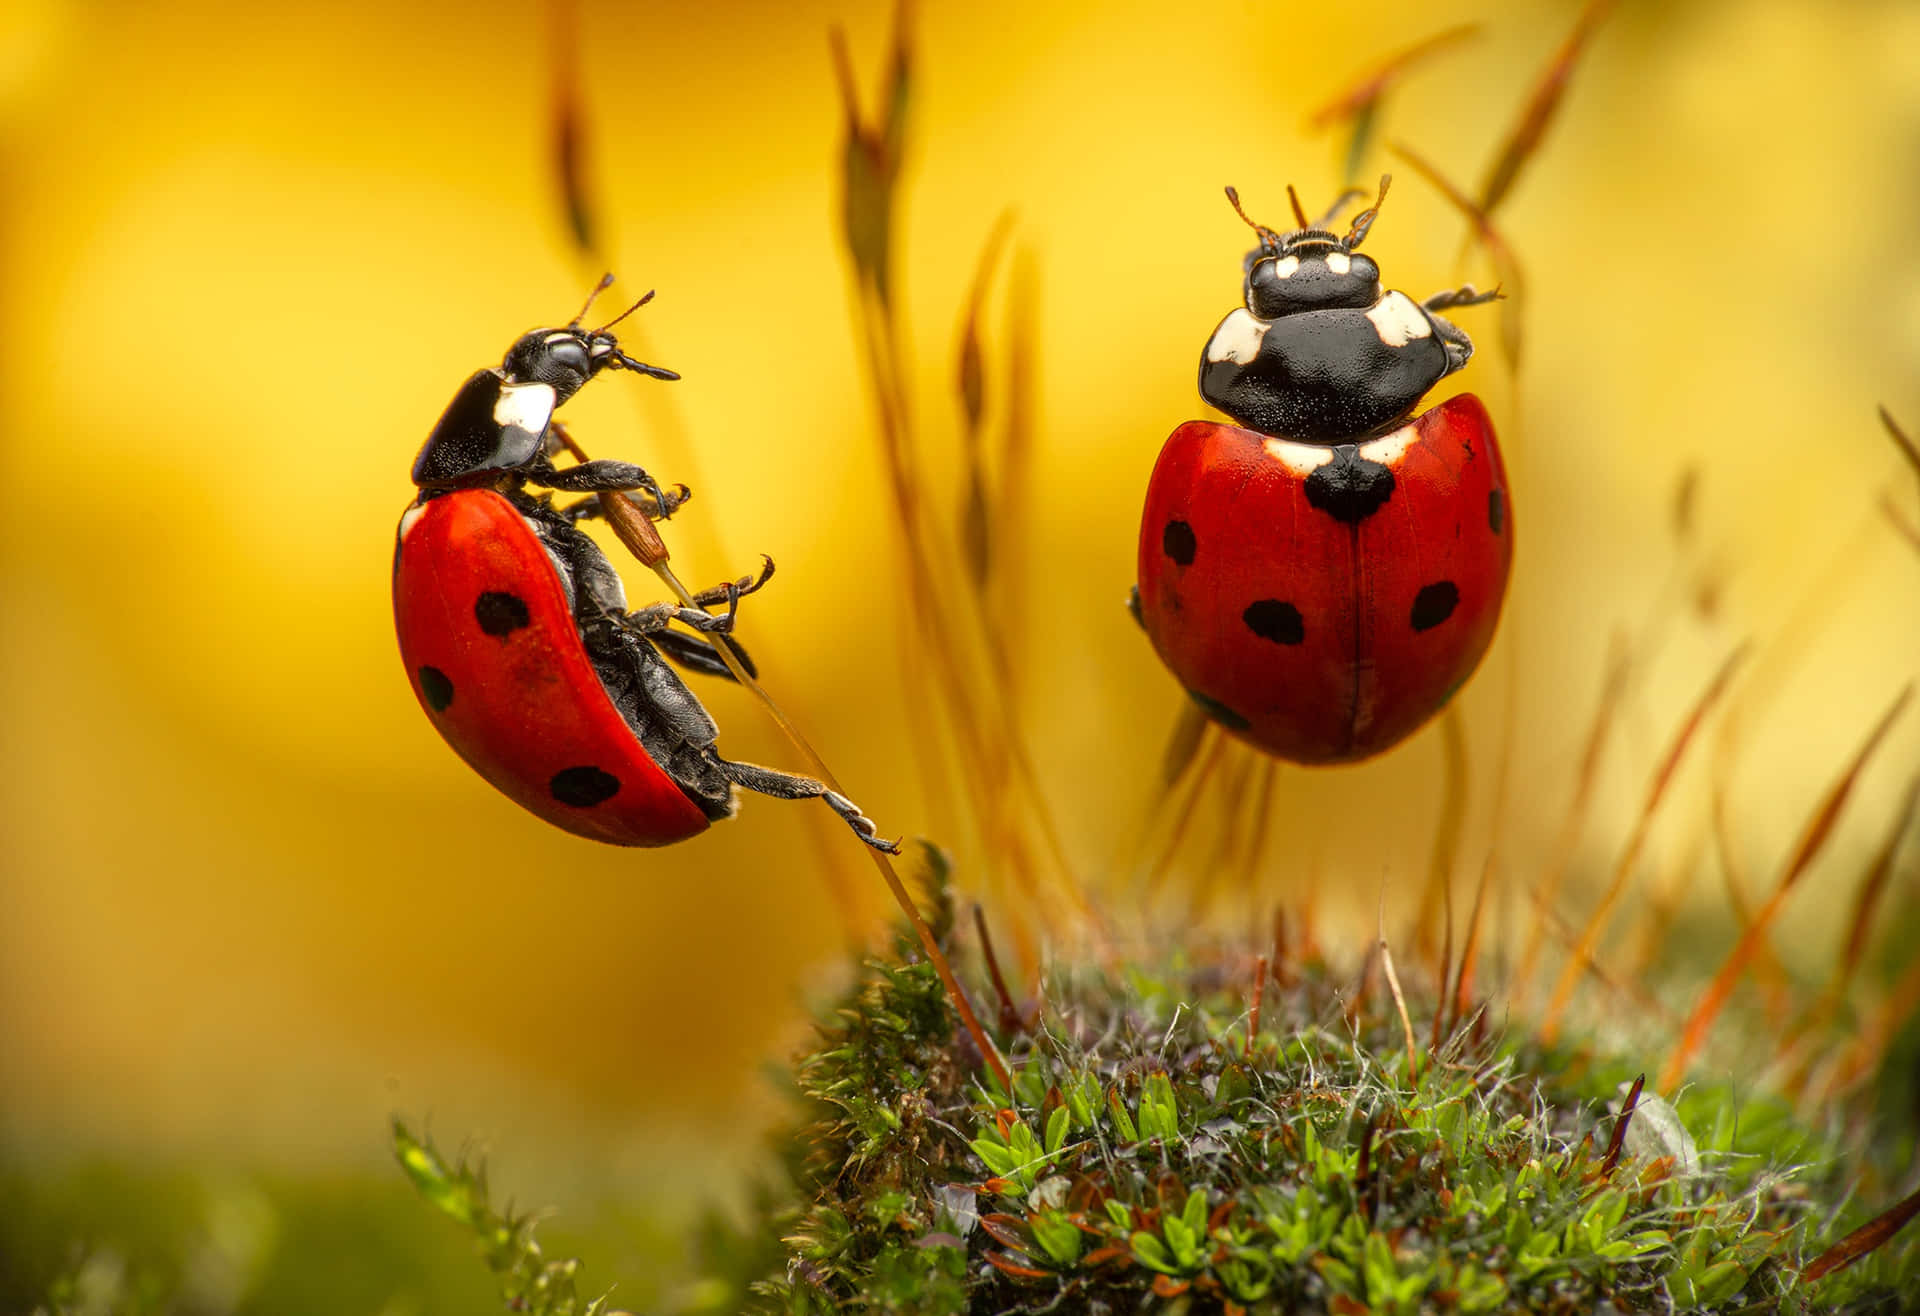 Exotic Red Insects in Natural Habitat Wallpaper